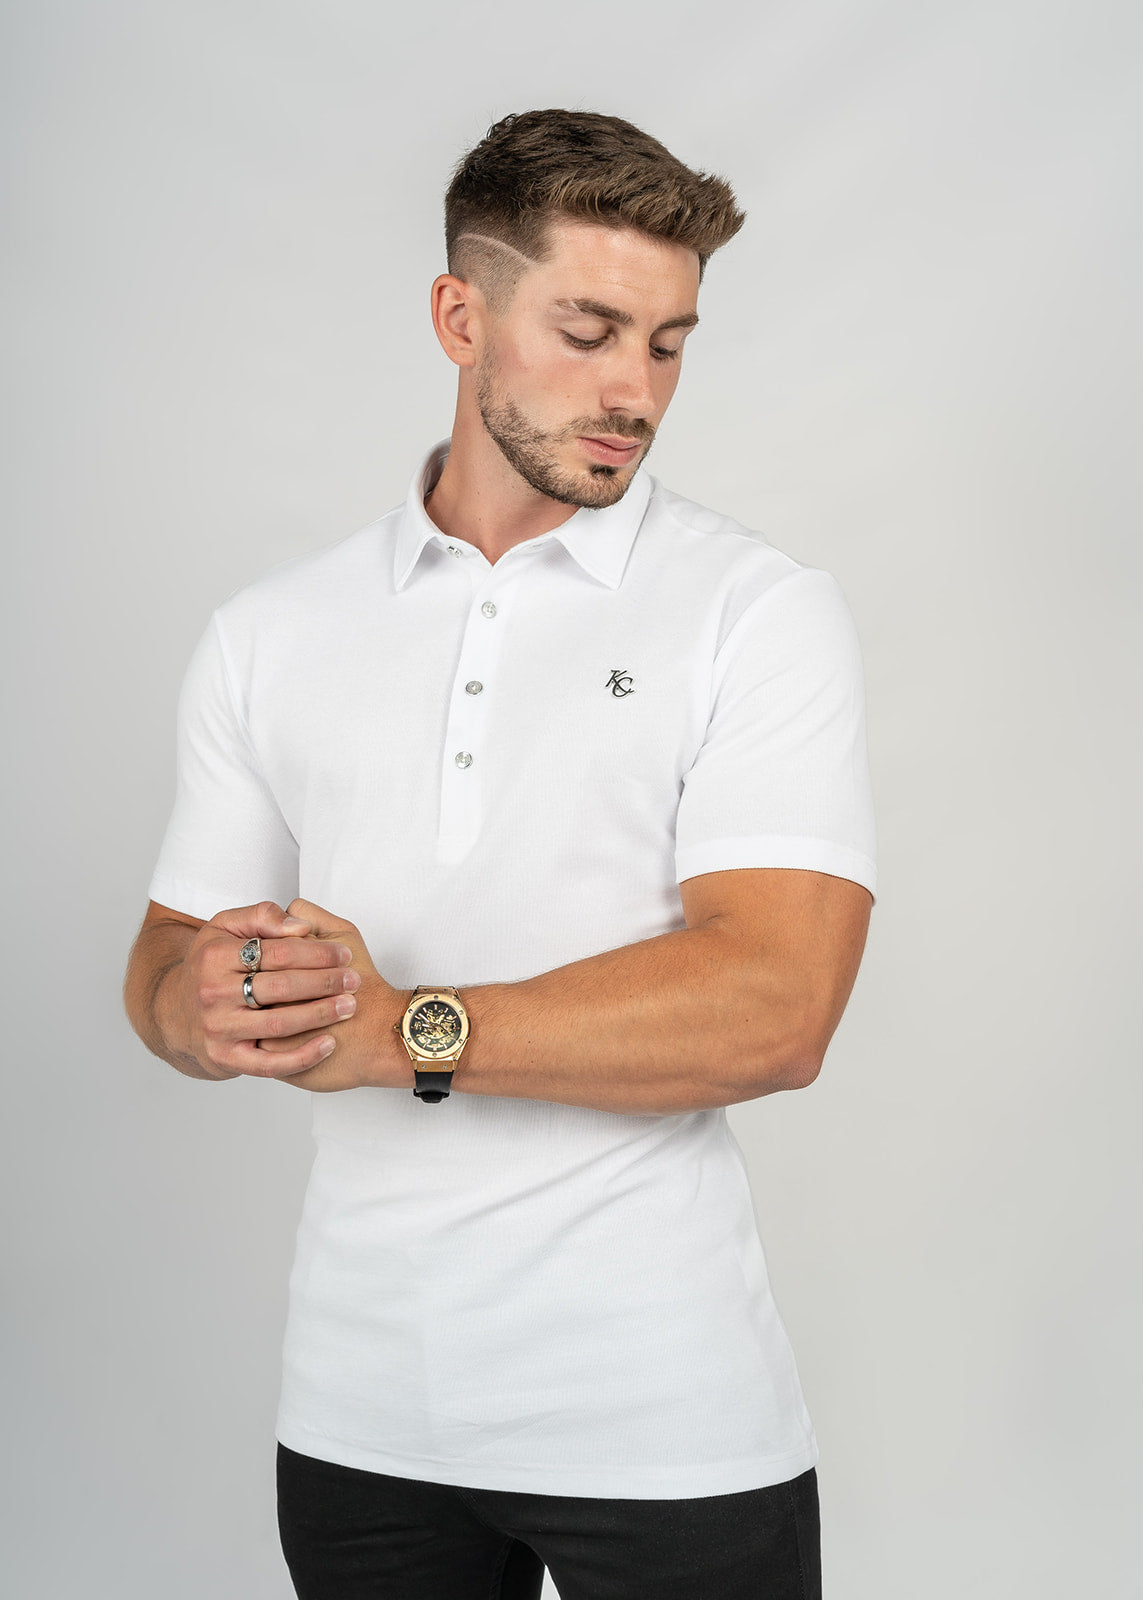 Best Men’s Polo Shirts for Big Arms